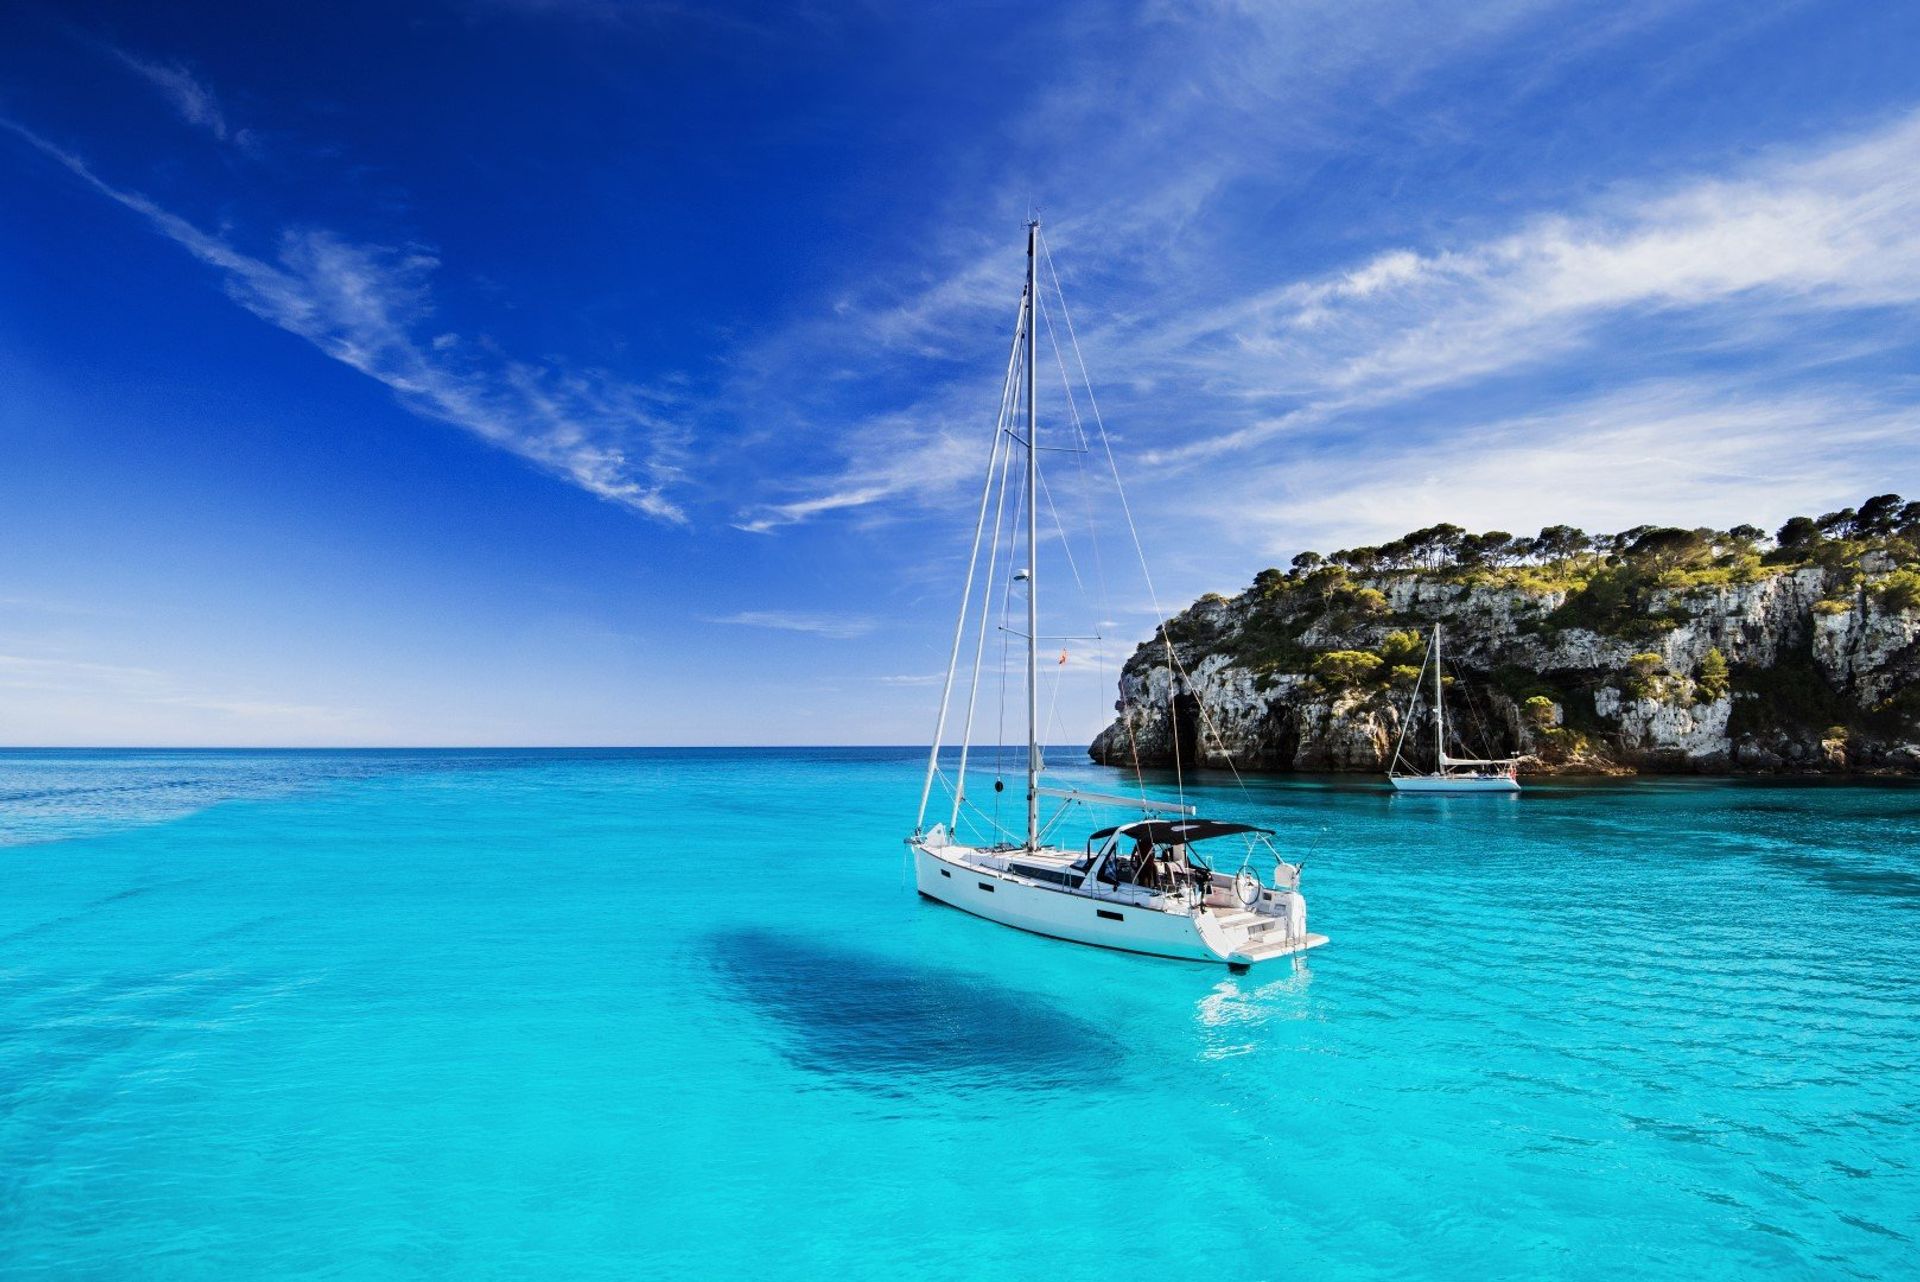 The crystal clear waters of Menorca